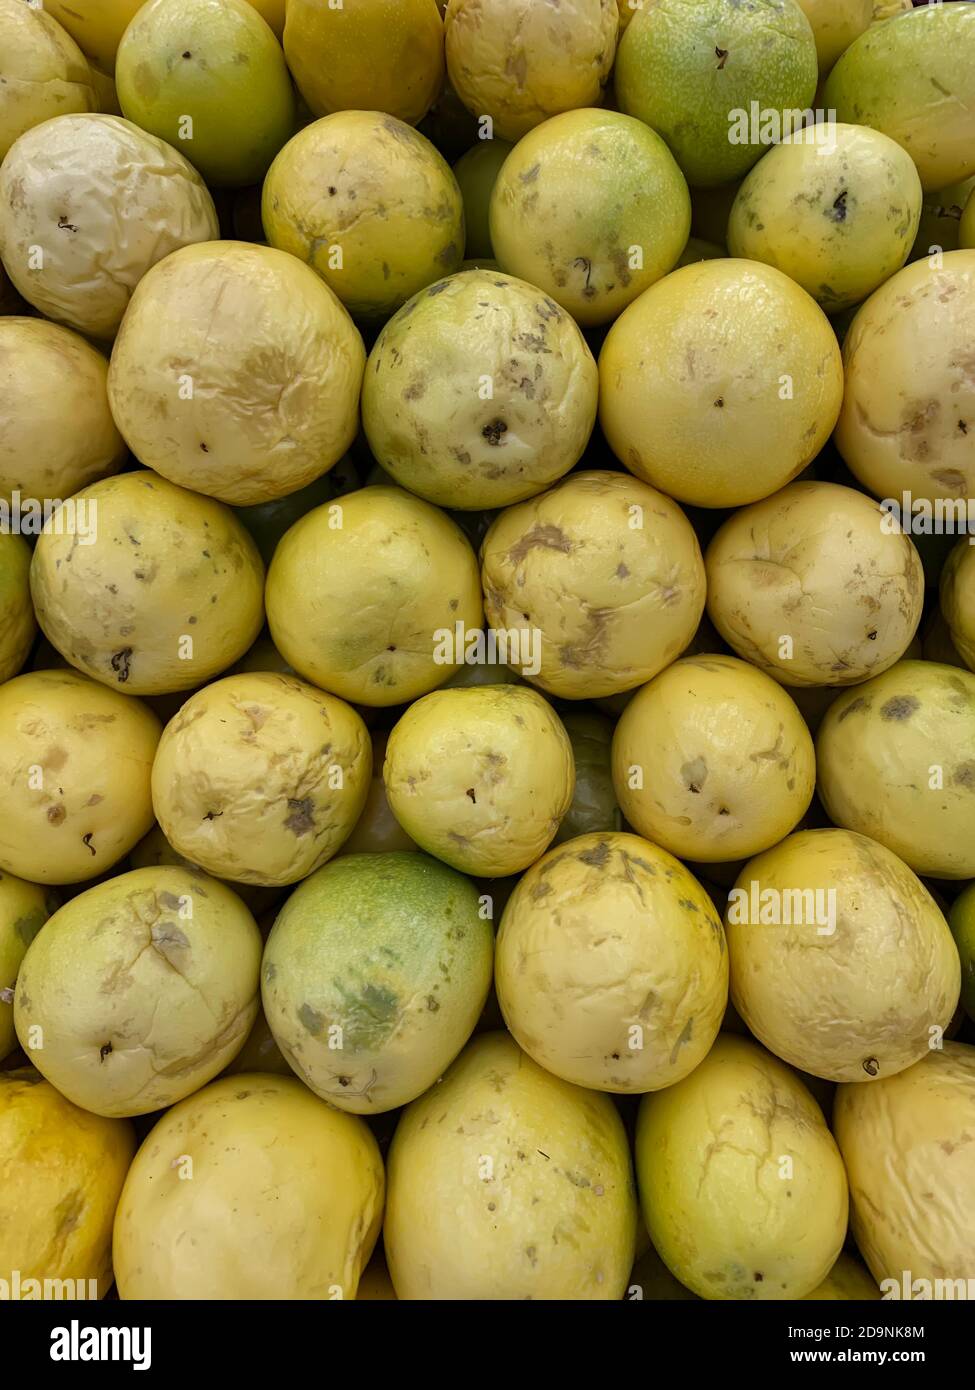 Group of passion fruits in Brazil Stock Photo